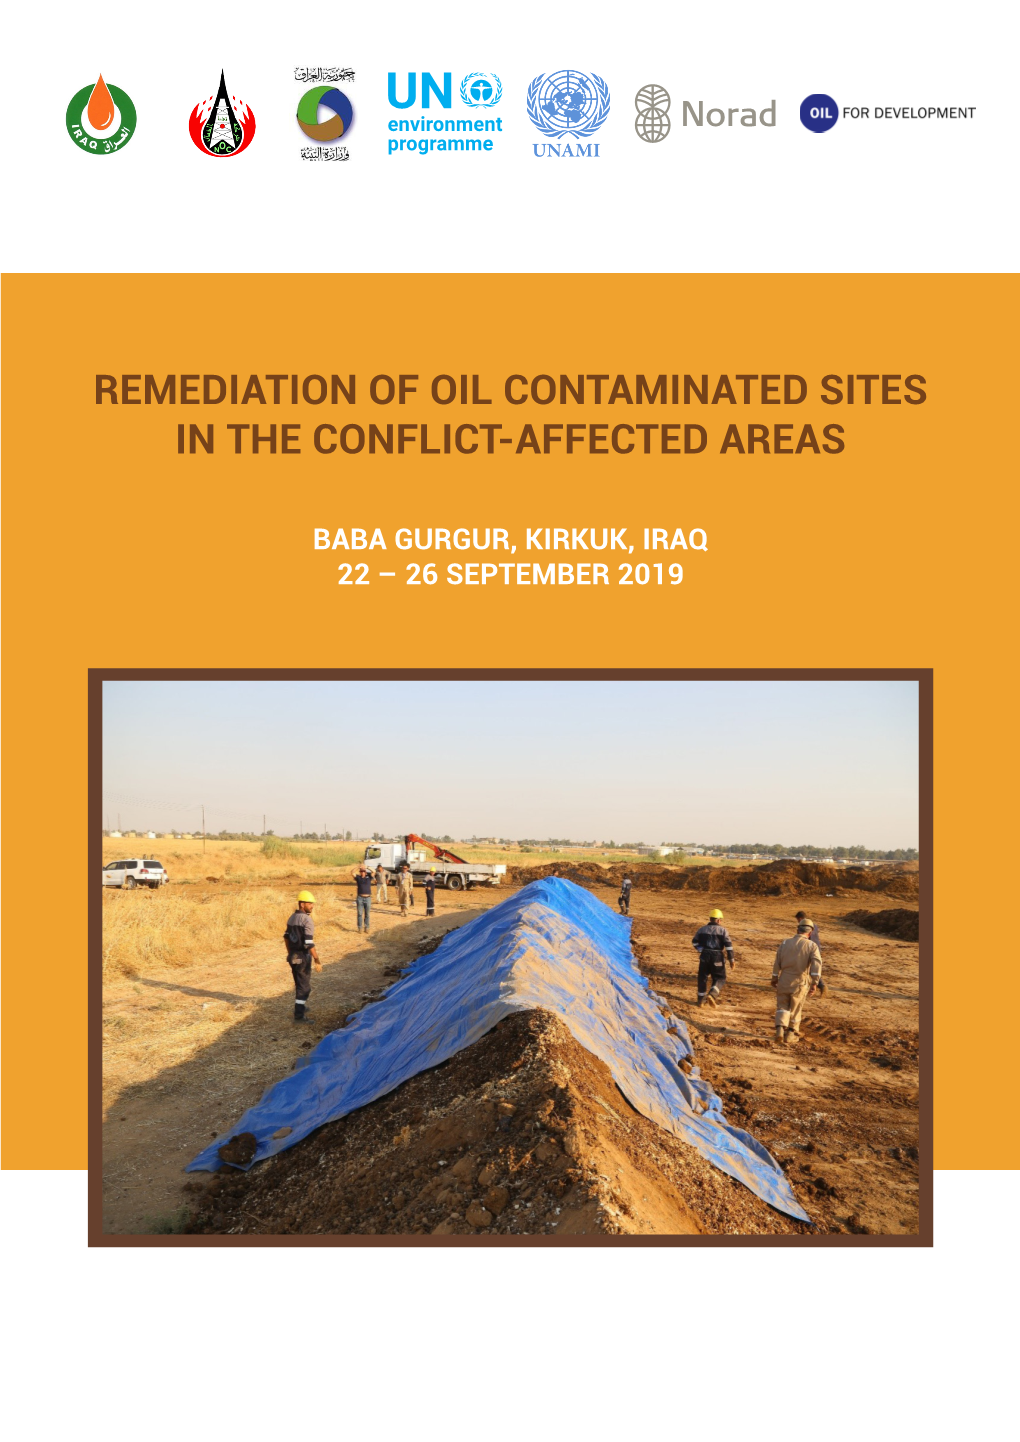 Remediation of Oil Contaminated Sites in the Conflict-Affected Areas